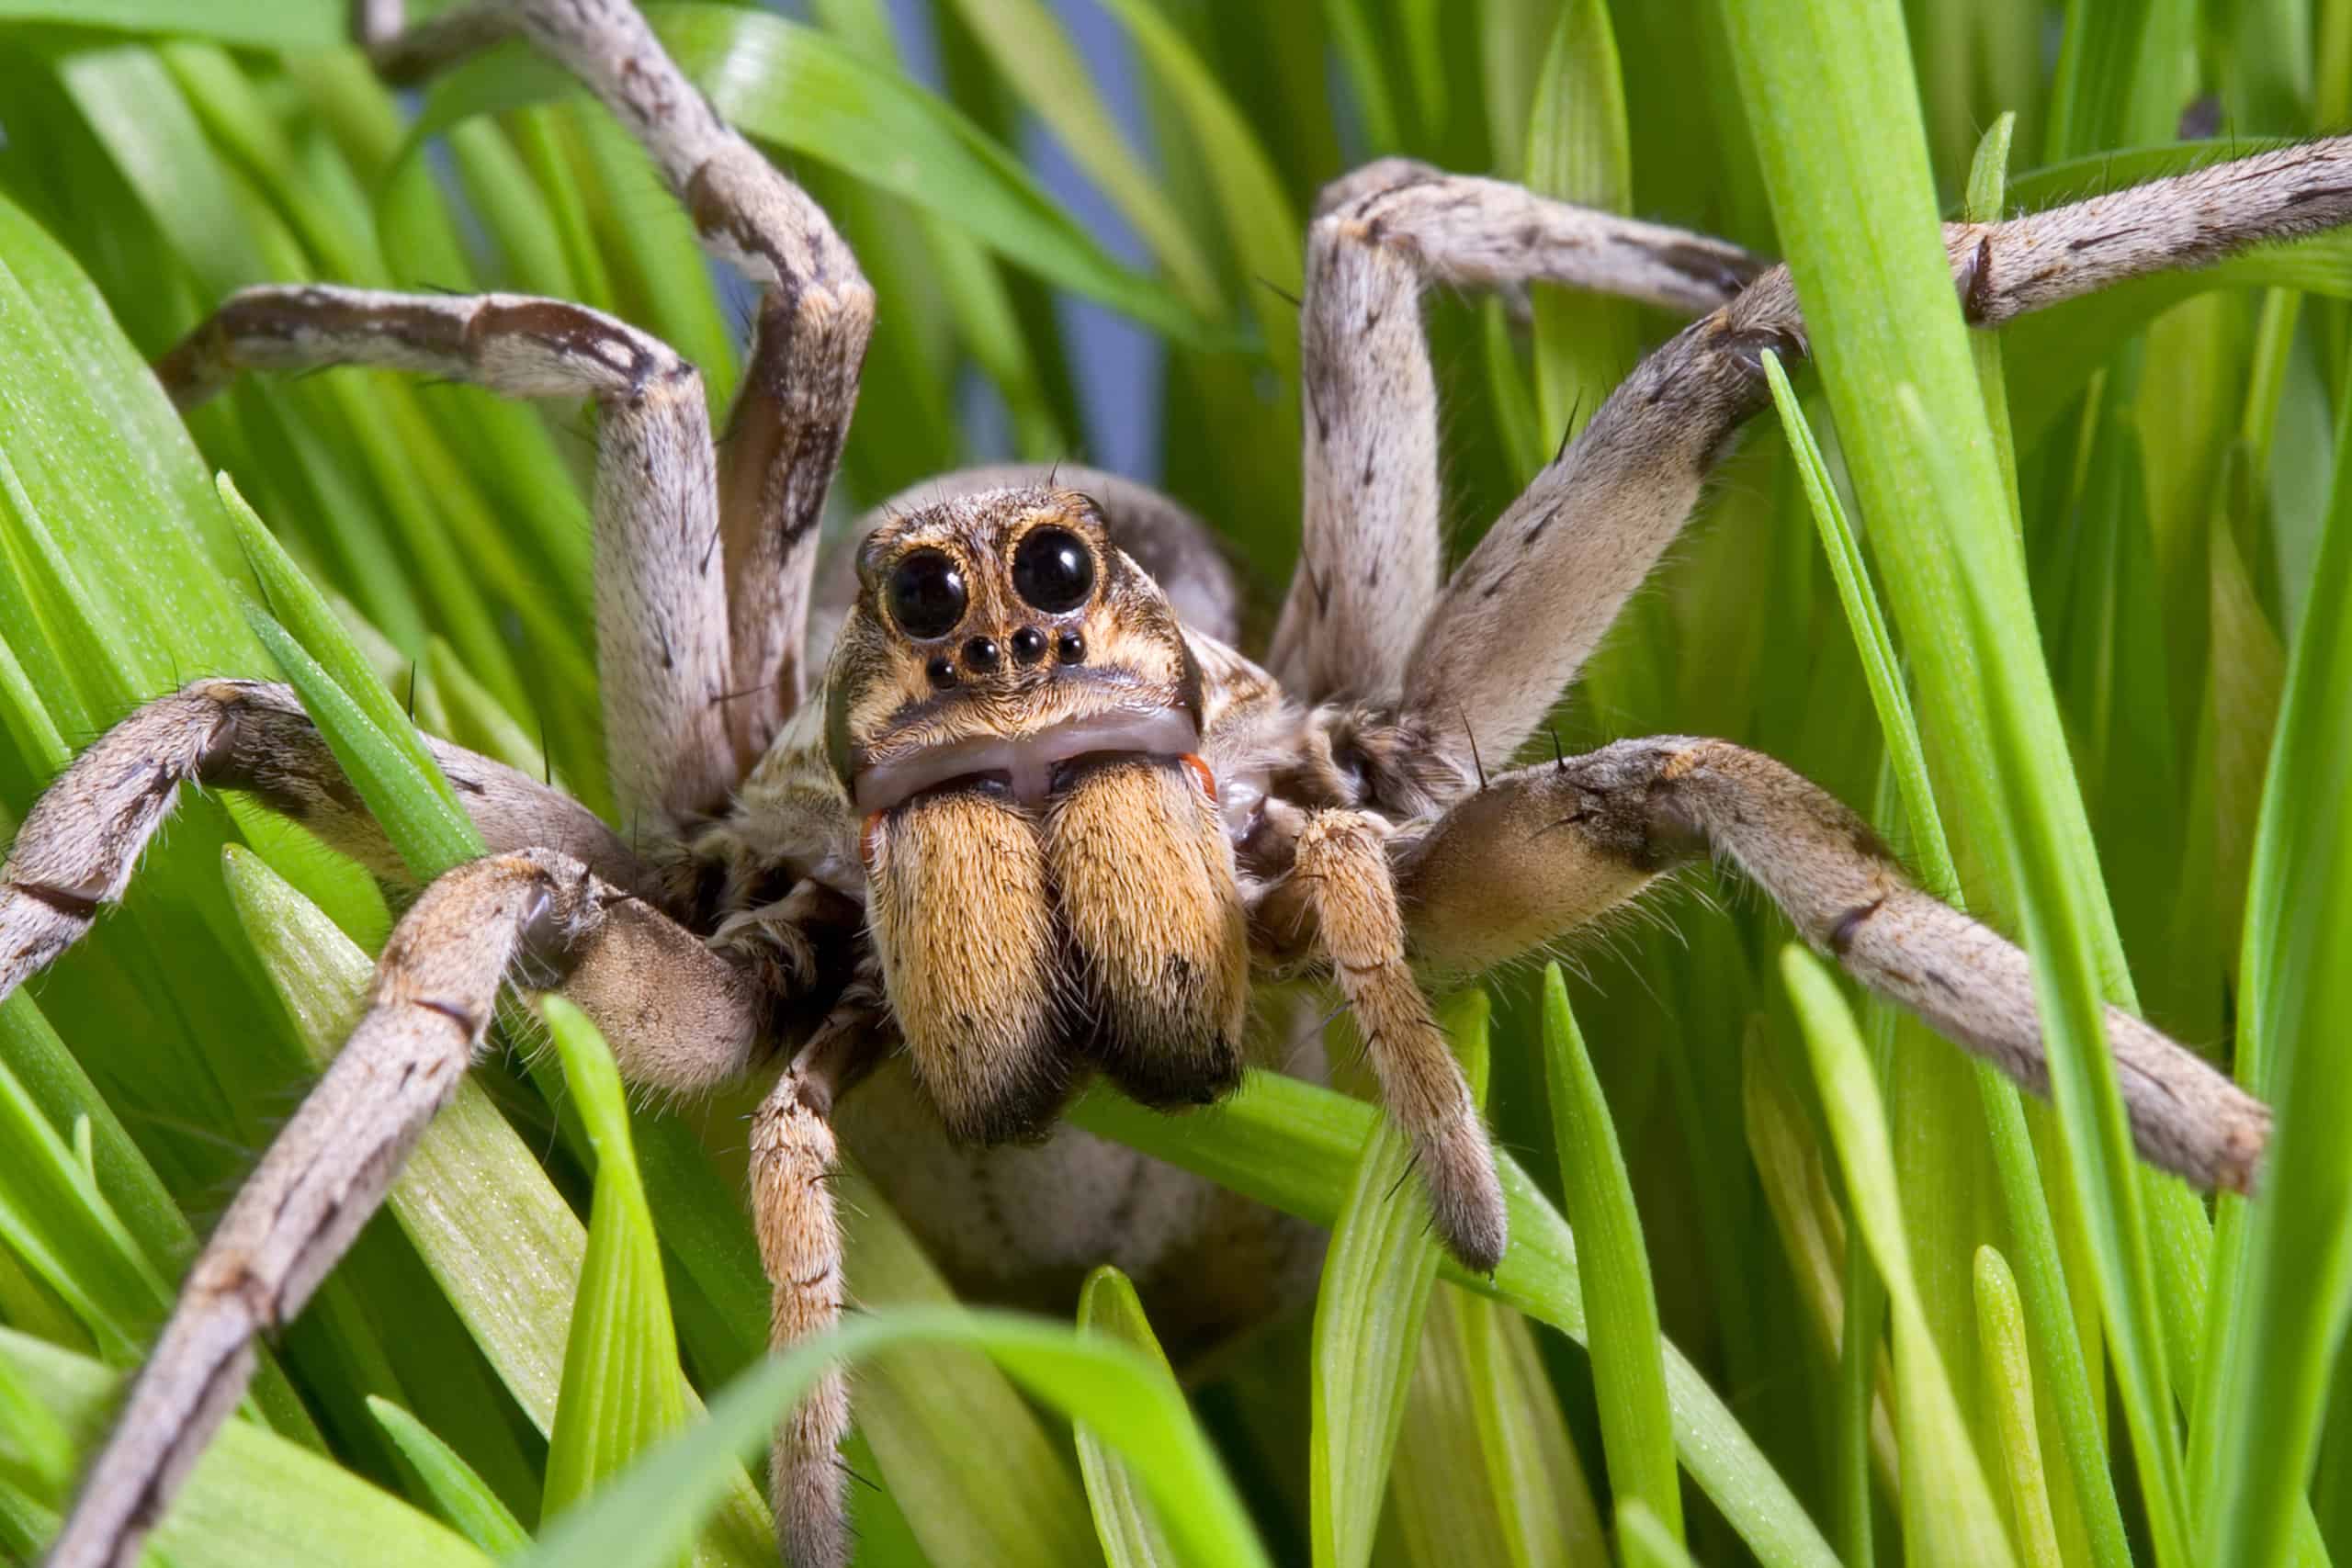 Maine has spiders that can hiss and jump